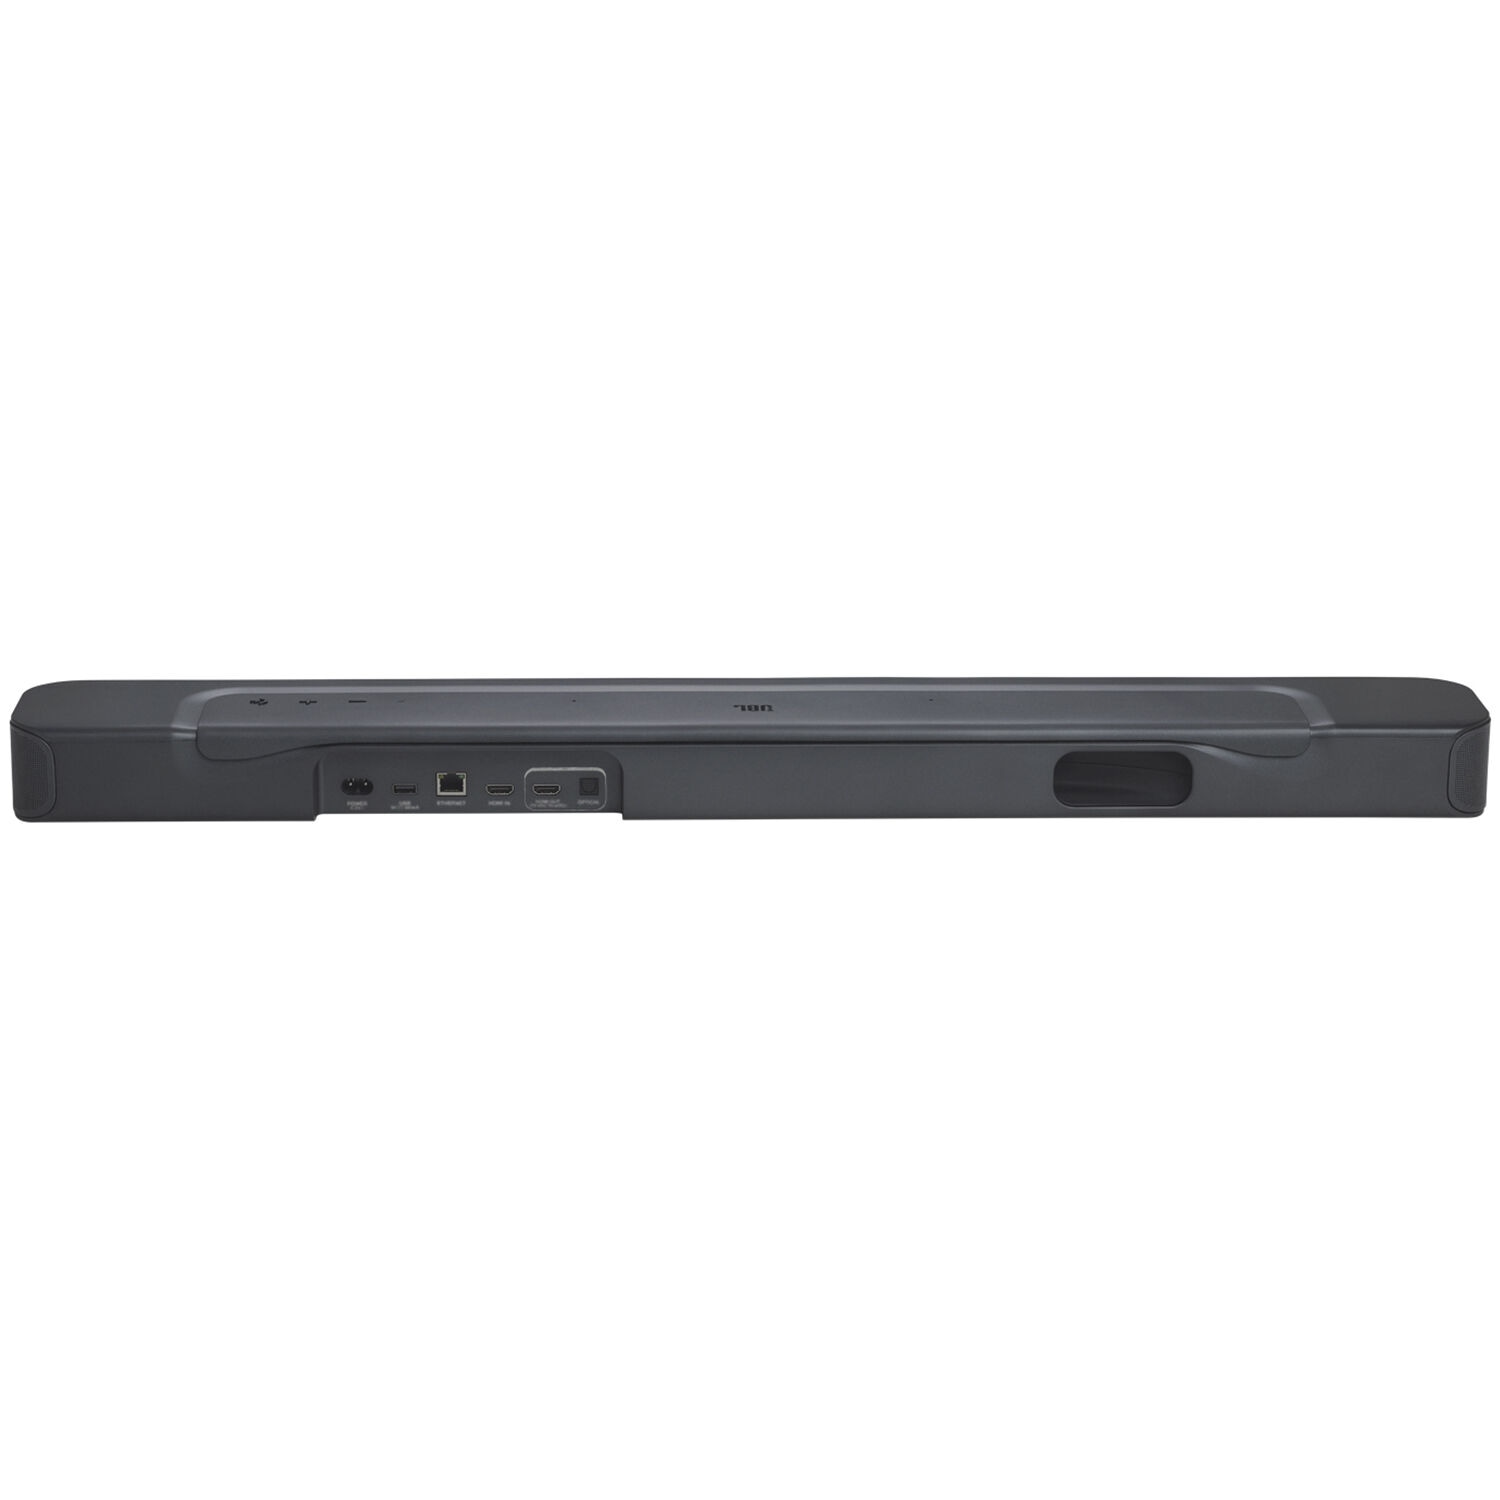 JBL - BAR 300 5.0ch Compact Dolby Atmos All-In-One Soundbar with Built-In  Subwoofer - Black